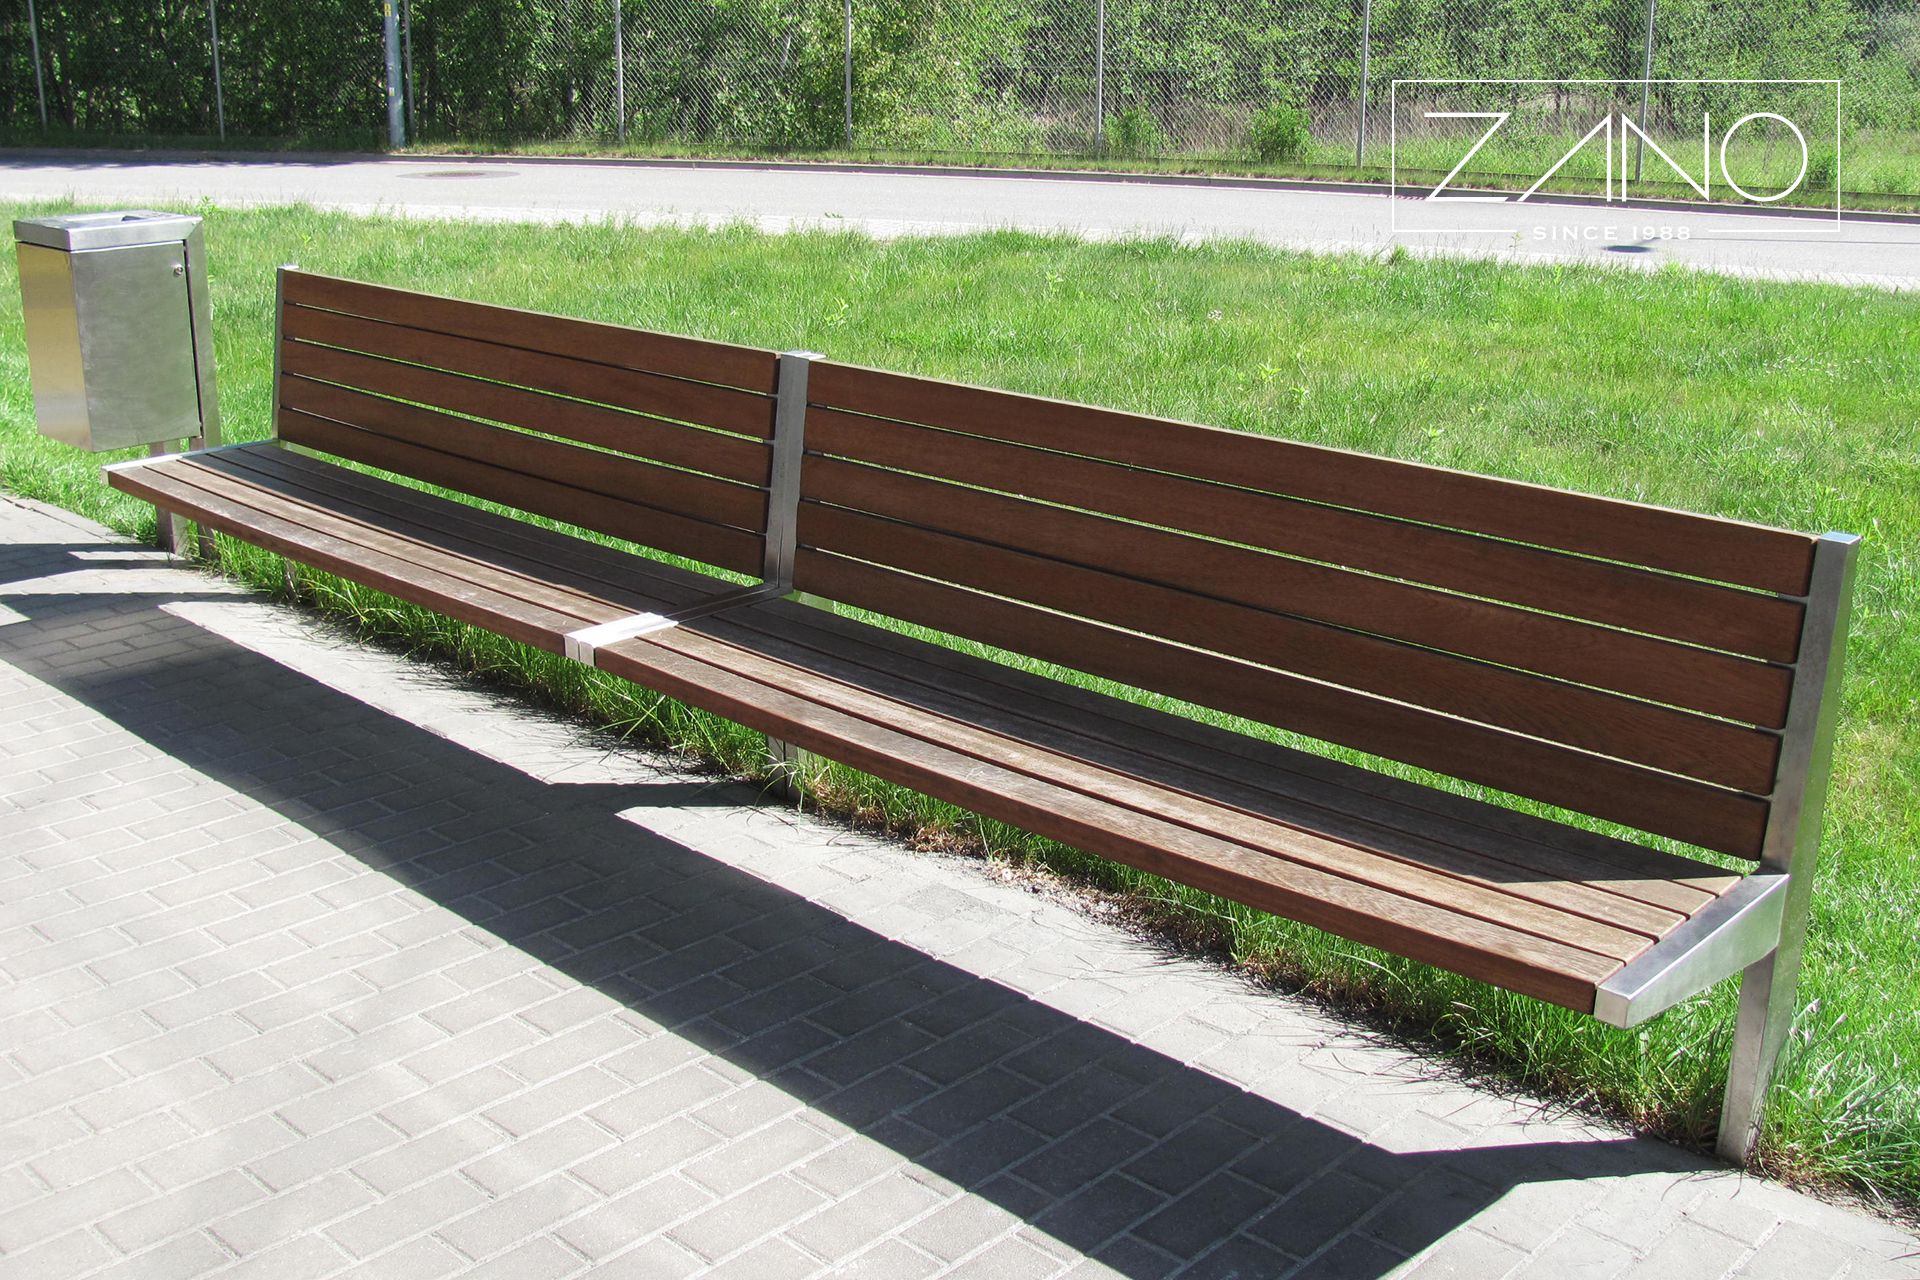 Park benches made of steel and hardwood